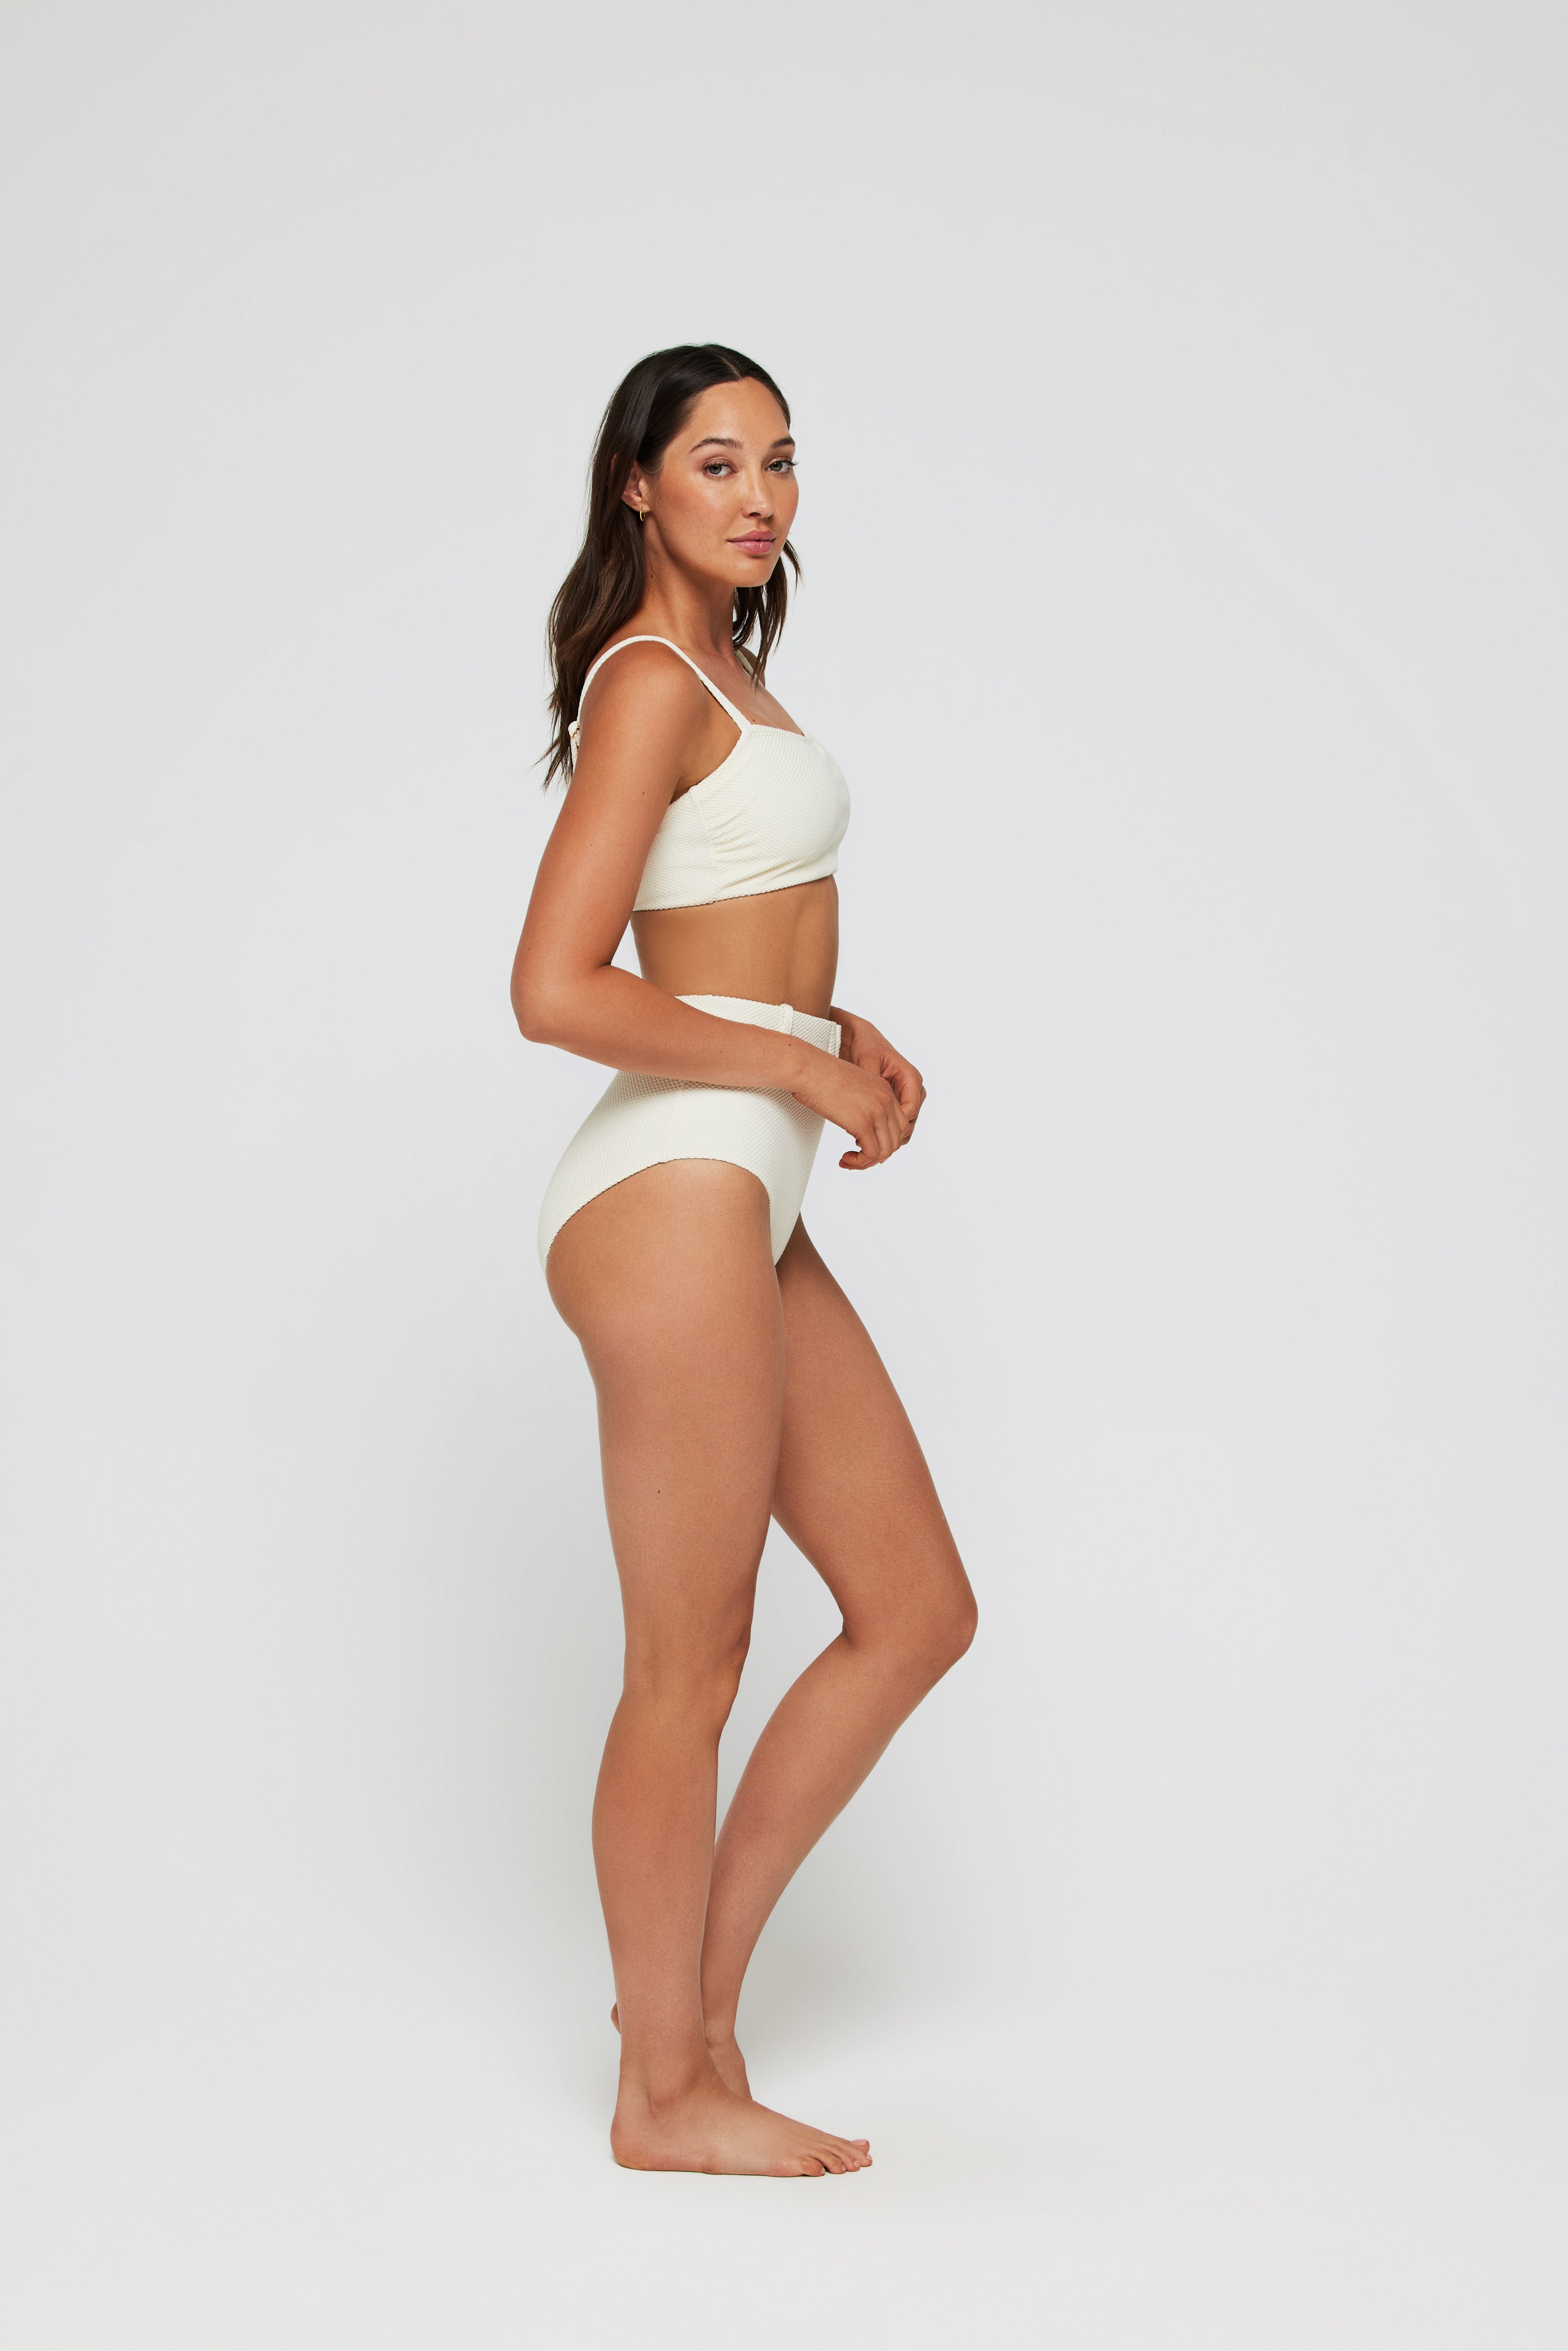 Lucia Two-Piece Swimsuit Top by Hermoza